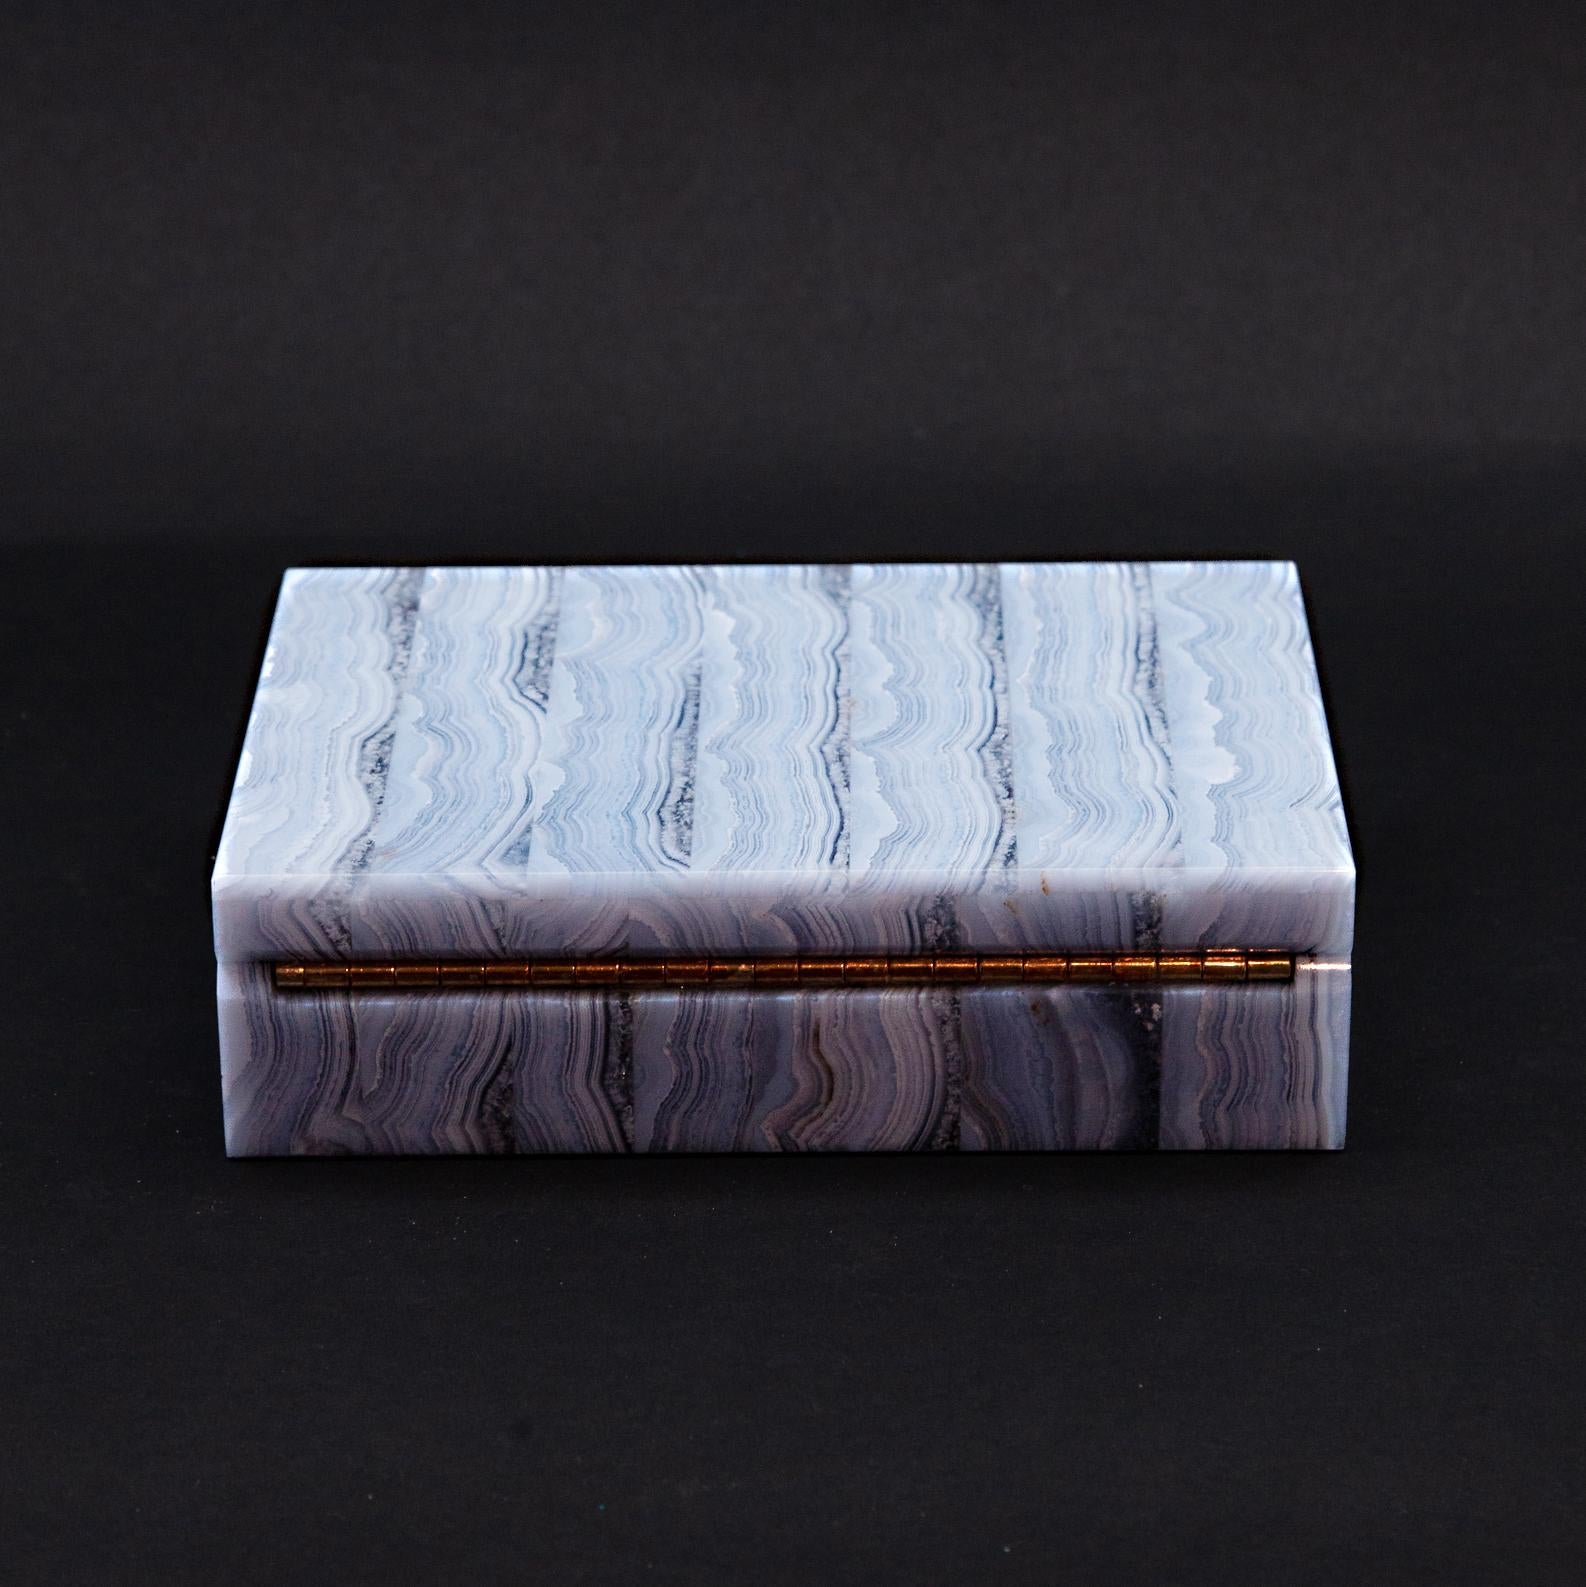 Blue lace agate box with light blue and white and translucent stripes. Fine black felt interior and gold tone hardware. Said to be a relaxing stone because of cool hues. Some healers say that the blue lace agate improves communication.

Measures: